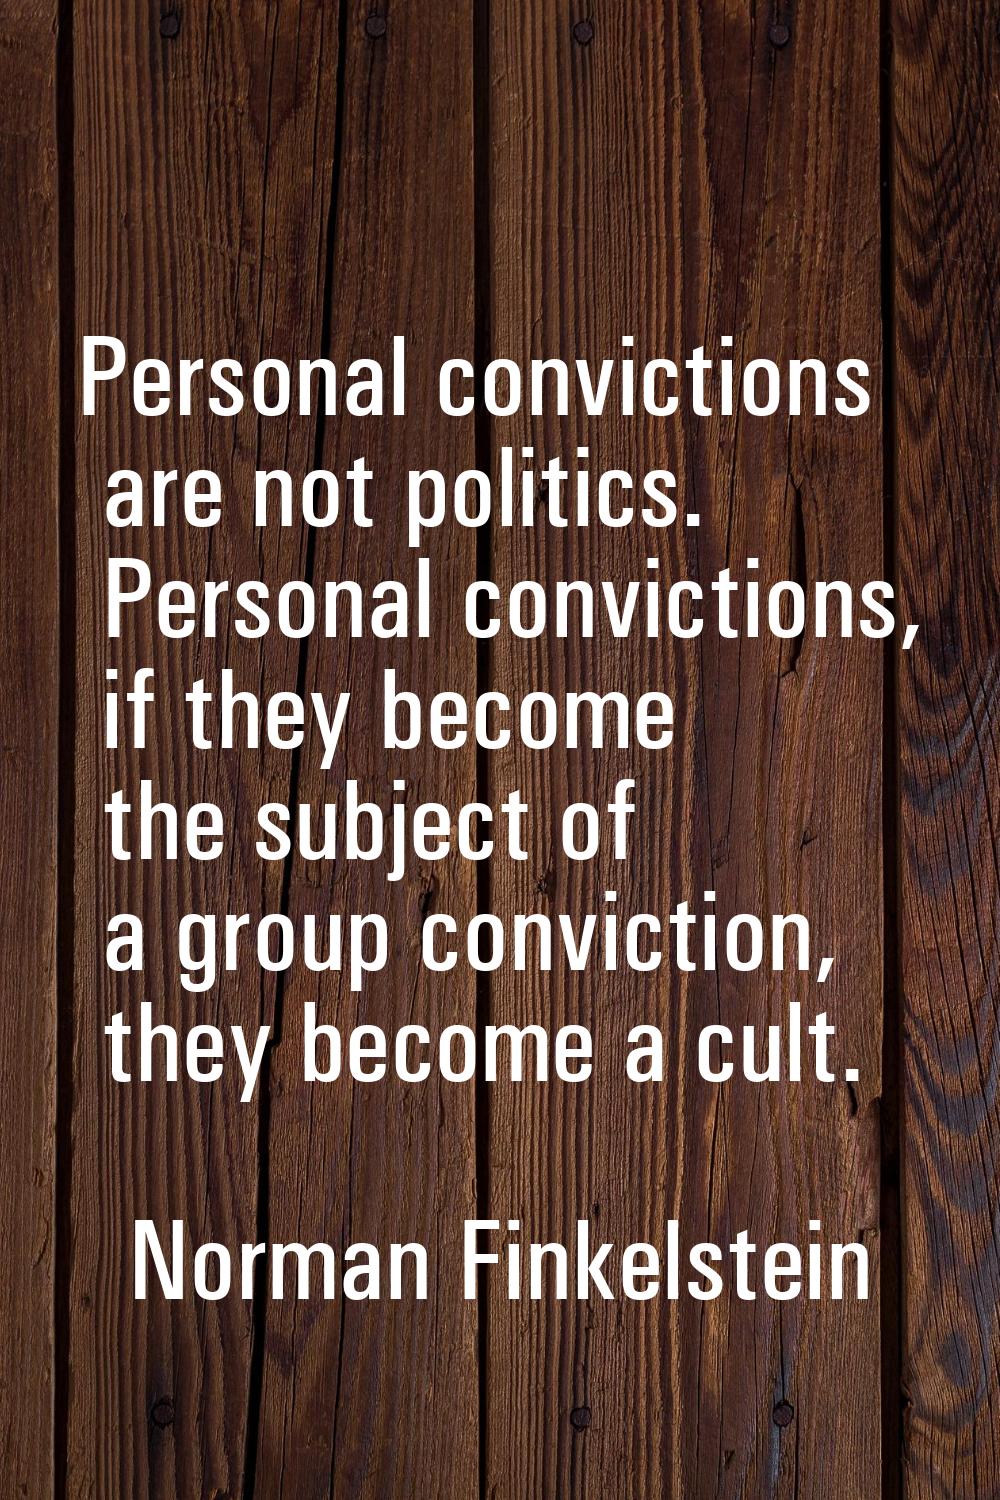 Personal convictions are not politics. Personal convictions, if they become the subject of a group 